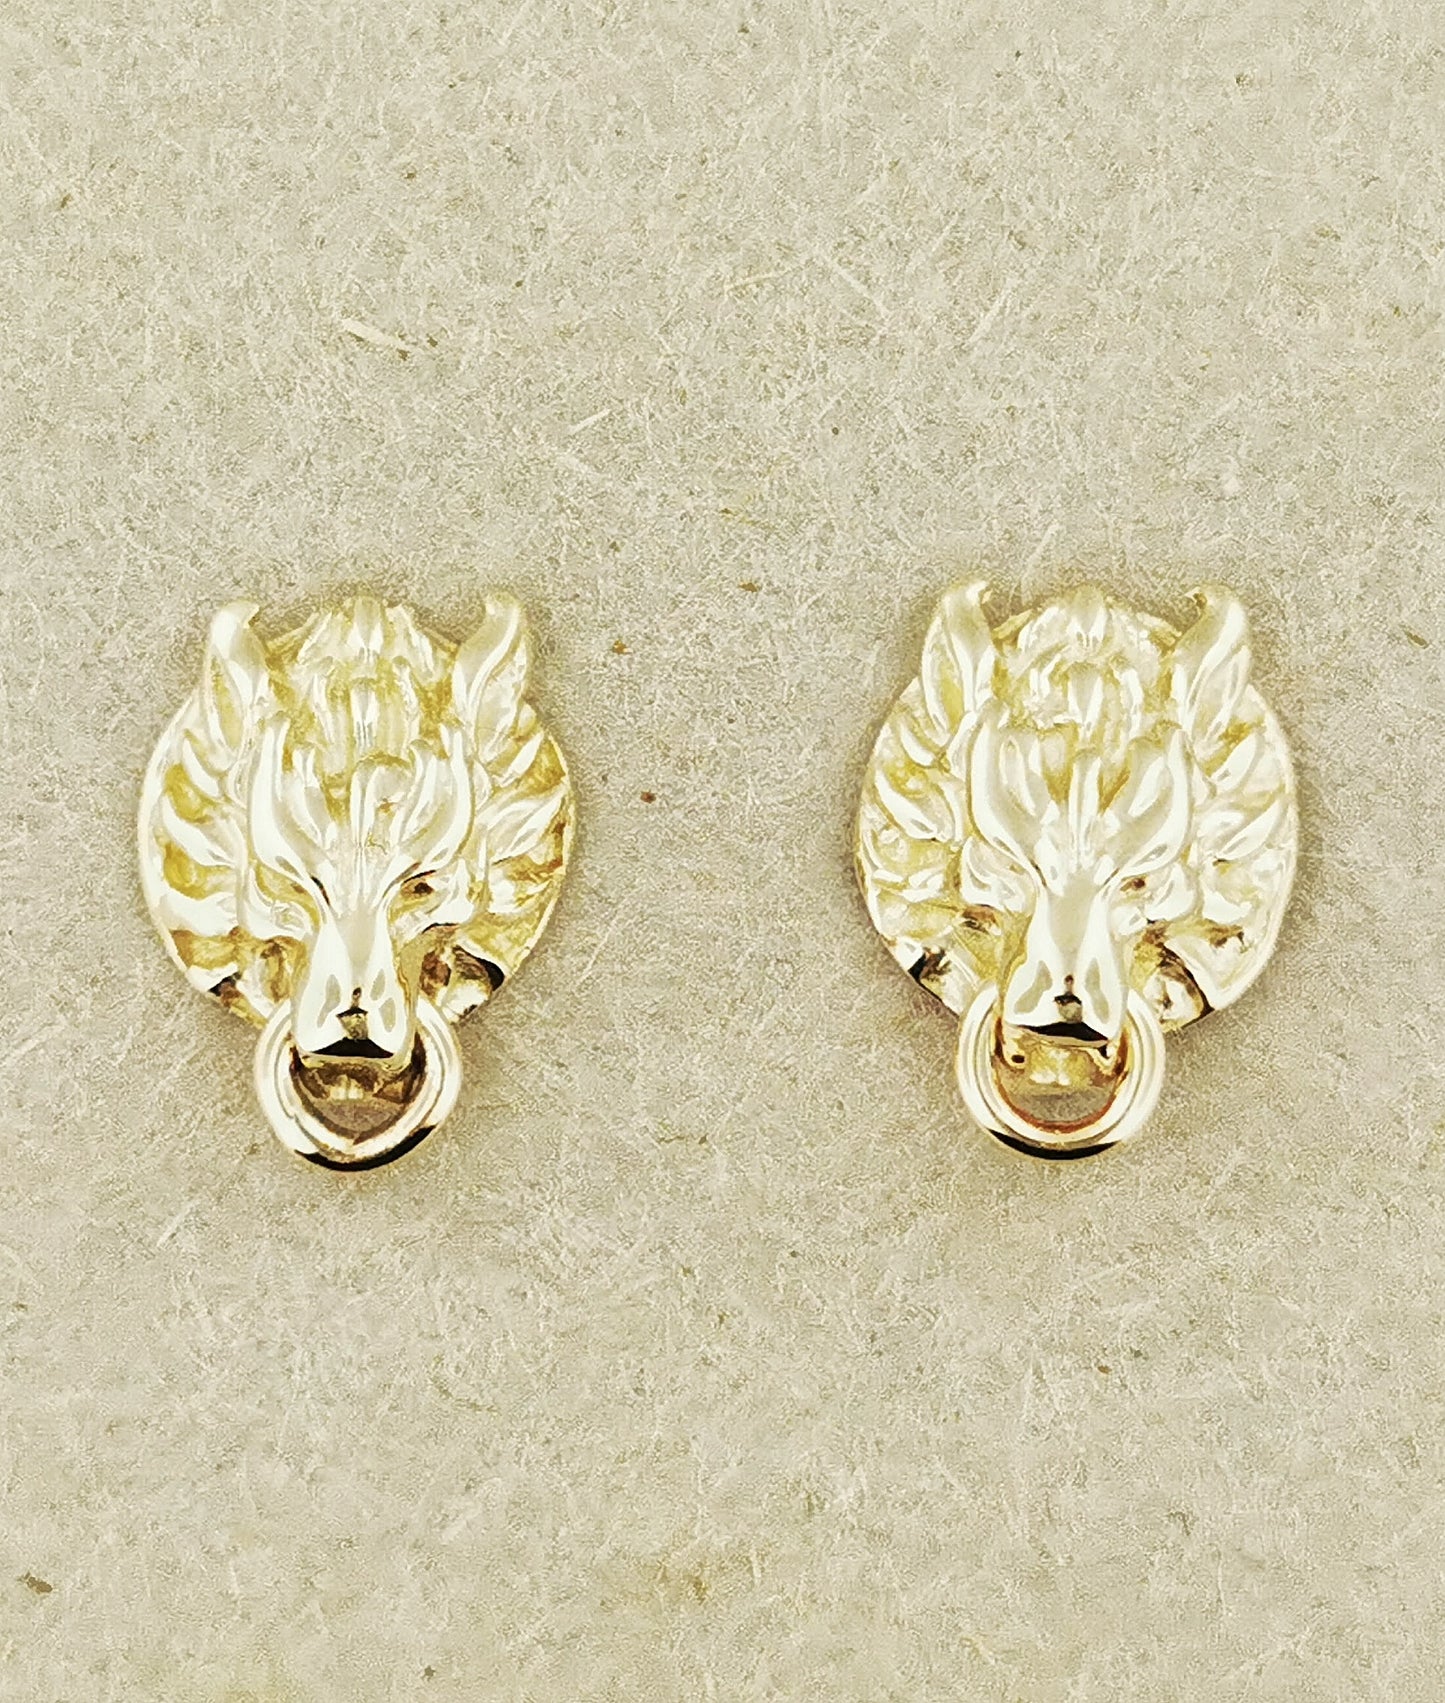 Gold FF7 Cloud Strife Wolf Stud Earrings, Gold FFVII Cloud Strife Wolf Stud Earrings, Final Fantasy Earrings, Gold FFVII Fenrir Wolf Stud Earrings, Gold Final Fantasy Earrings